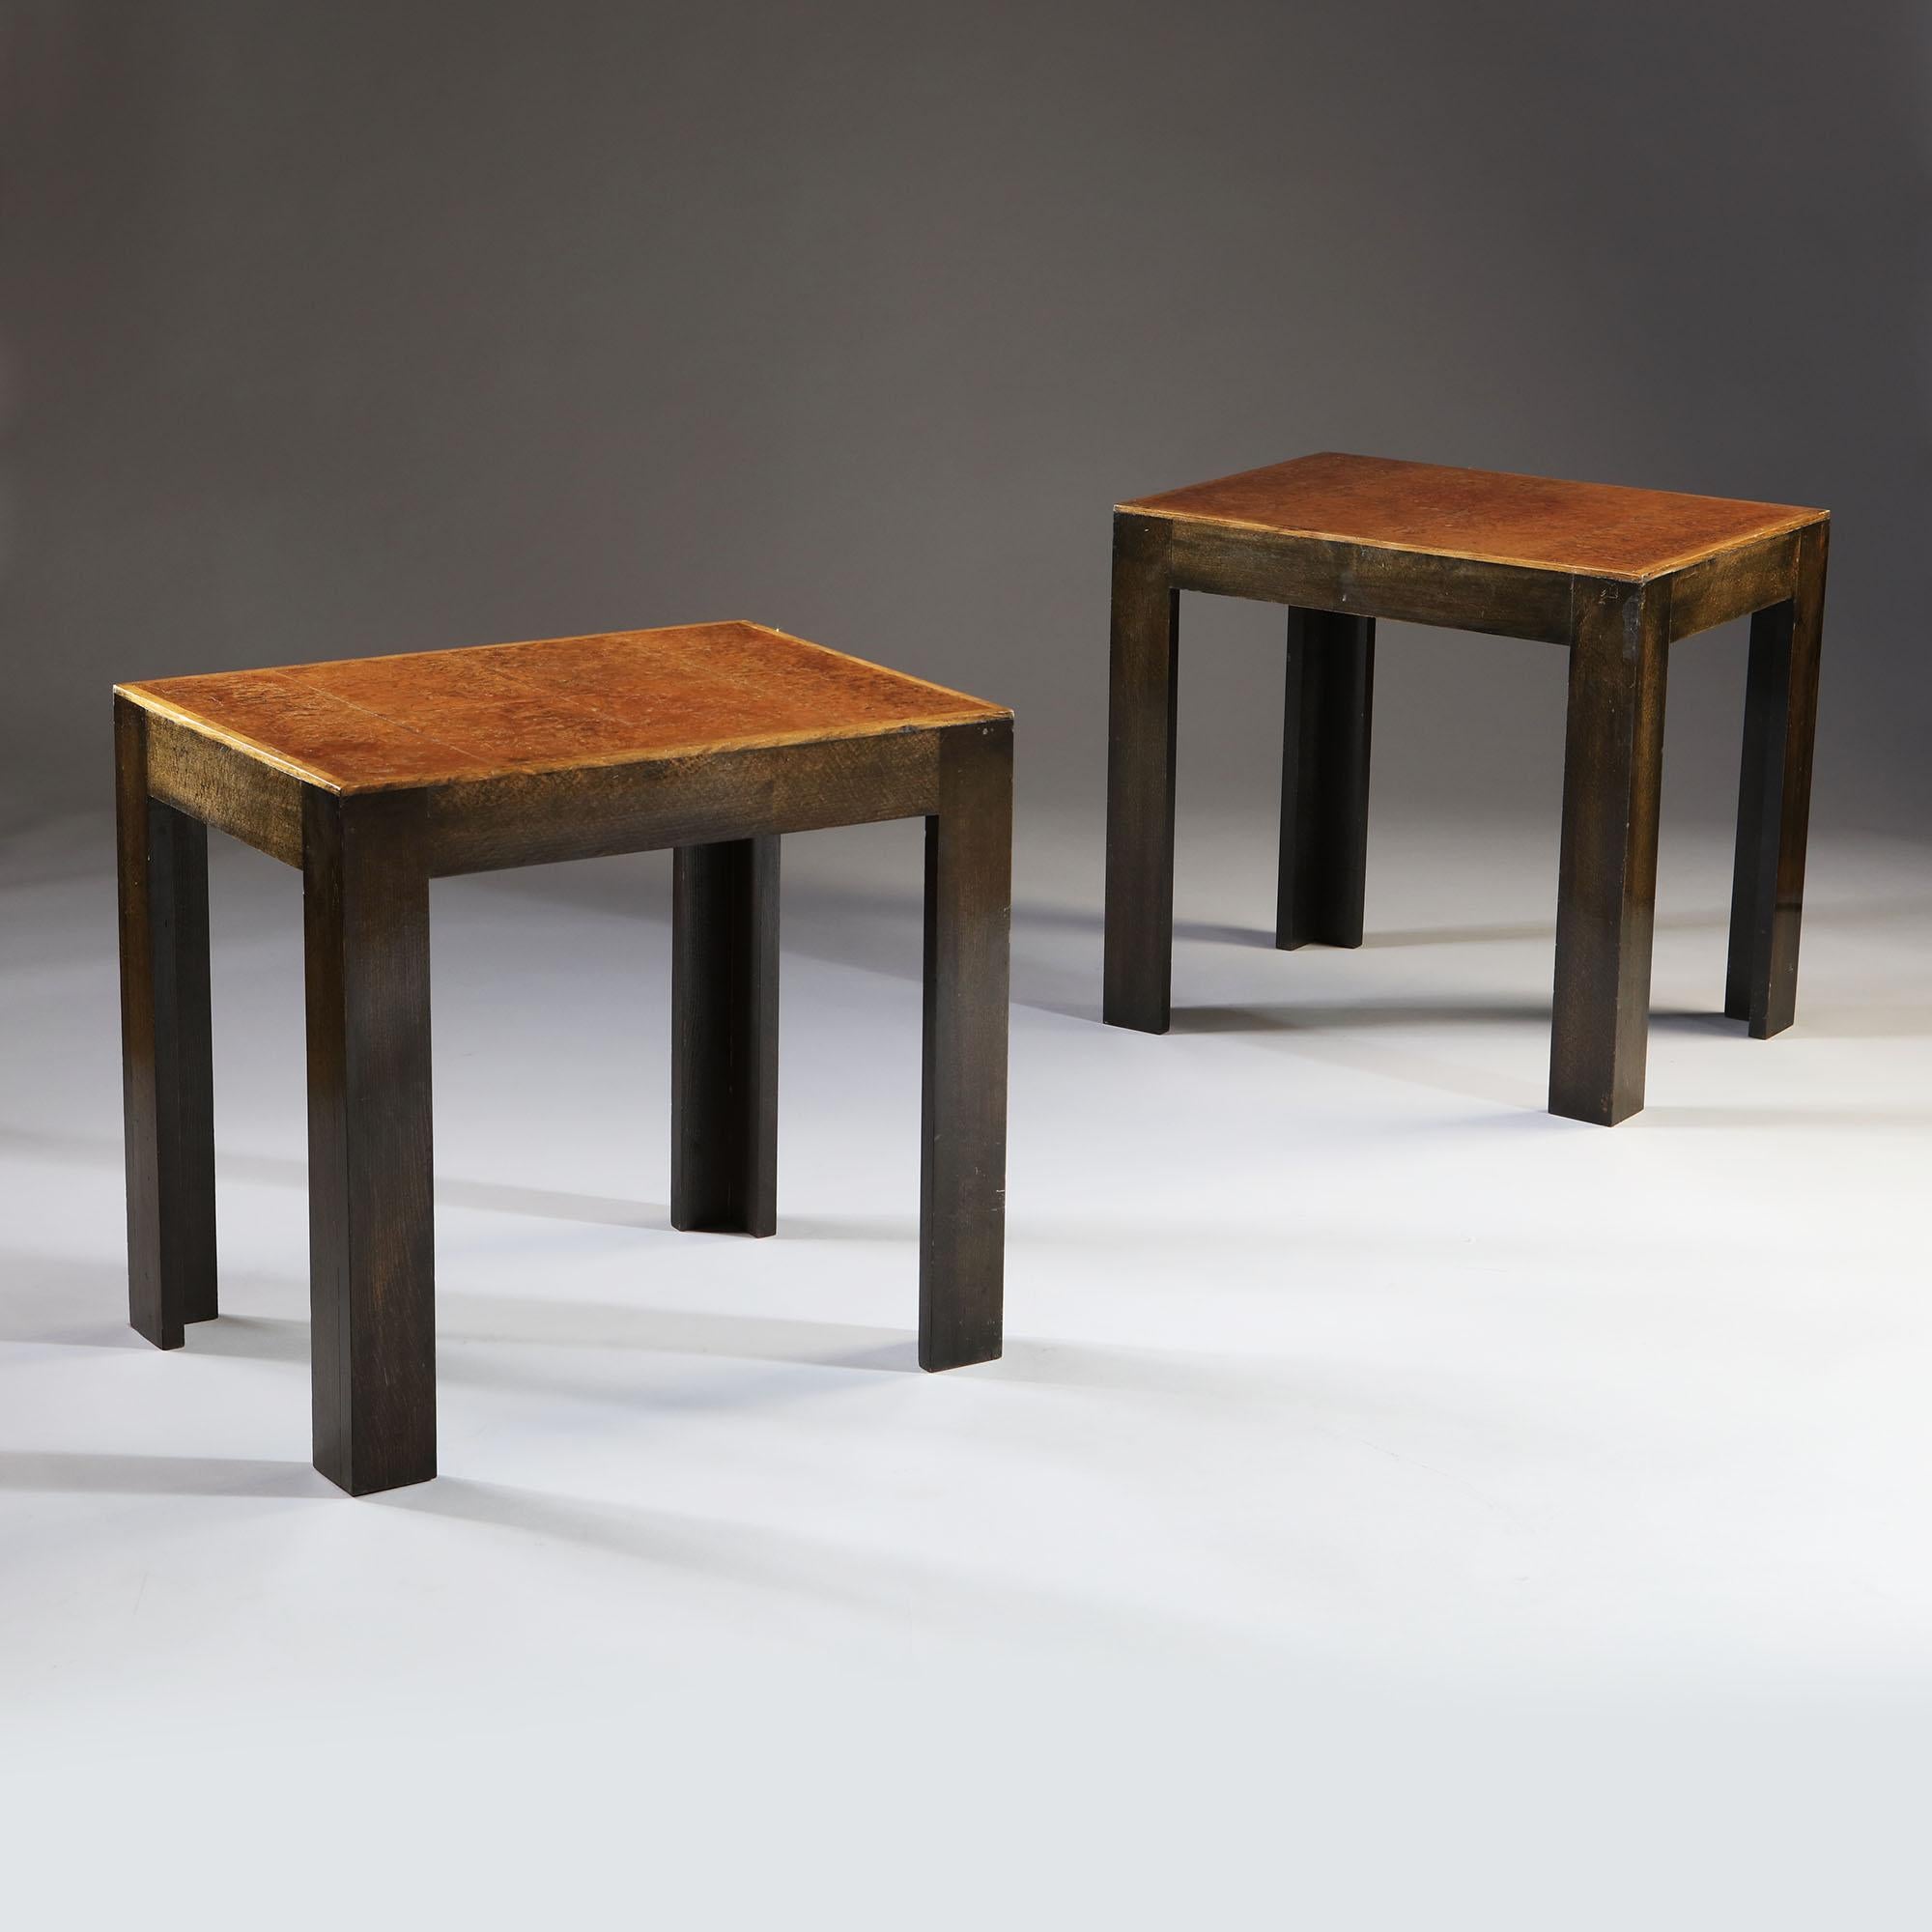 A pair of early 20th century French tables in the Modernist style, with amboyna veneer to the tops and ebonized legs.